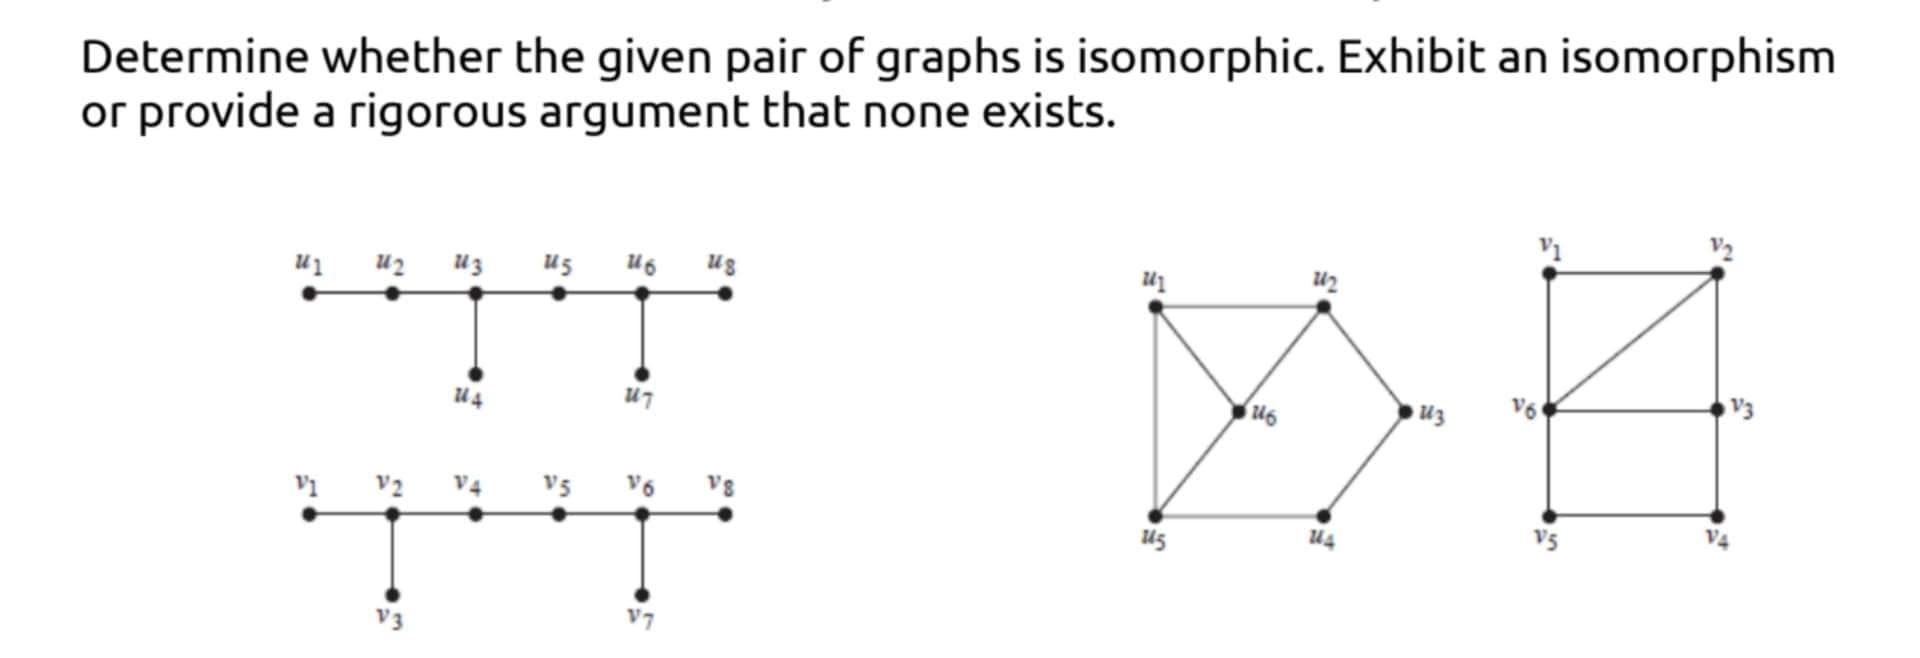 Determine whether the given pair of graphs is isomorphic. Exhibit an isomorphism
or provide a rigorous argument that none exists.
us
u2
Uz
V5
V8
v2
44
us
V7
V3
